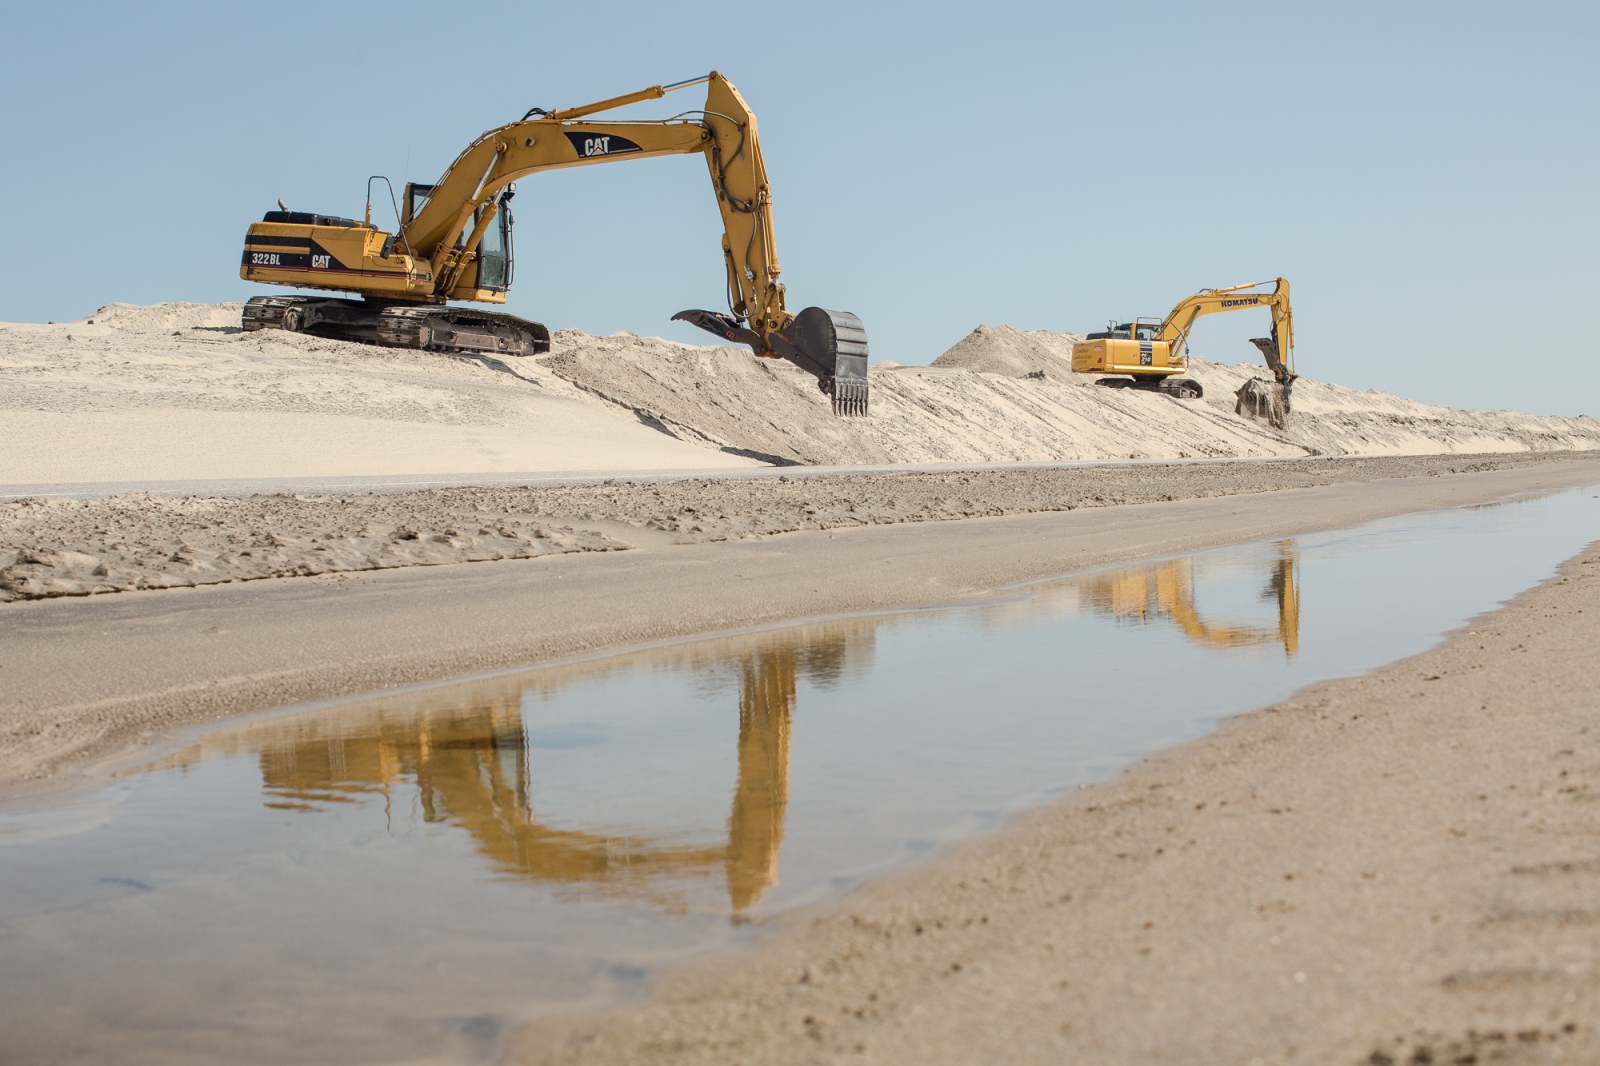  On Pea Island, bulldozers scra...ures are rapidly eroding them. 